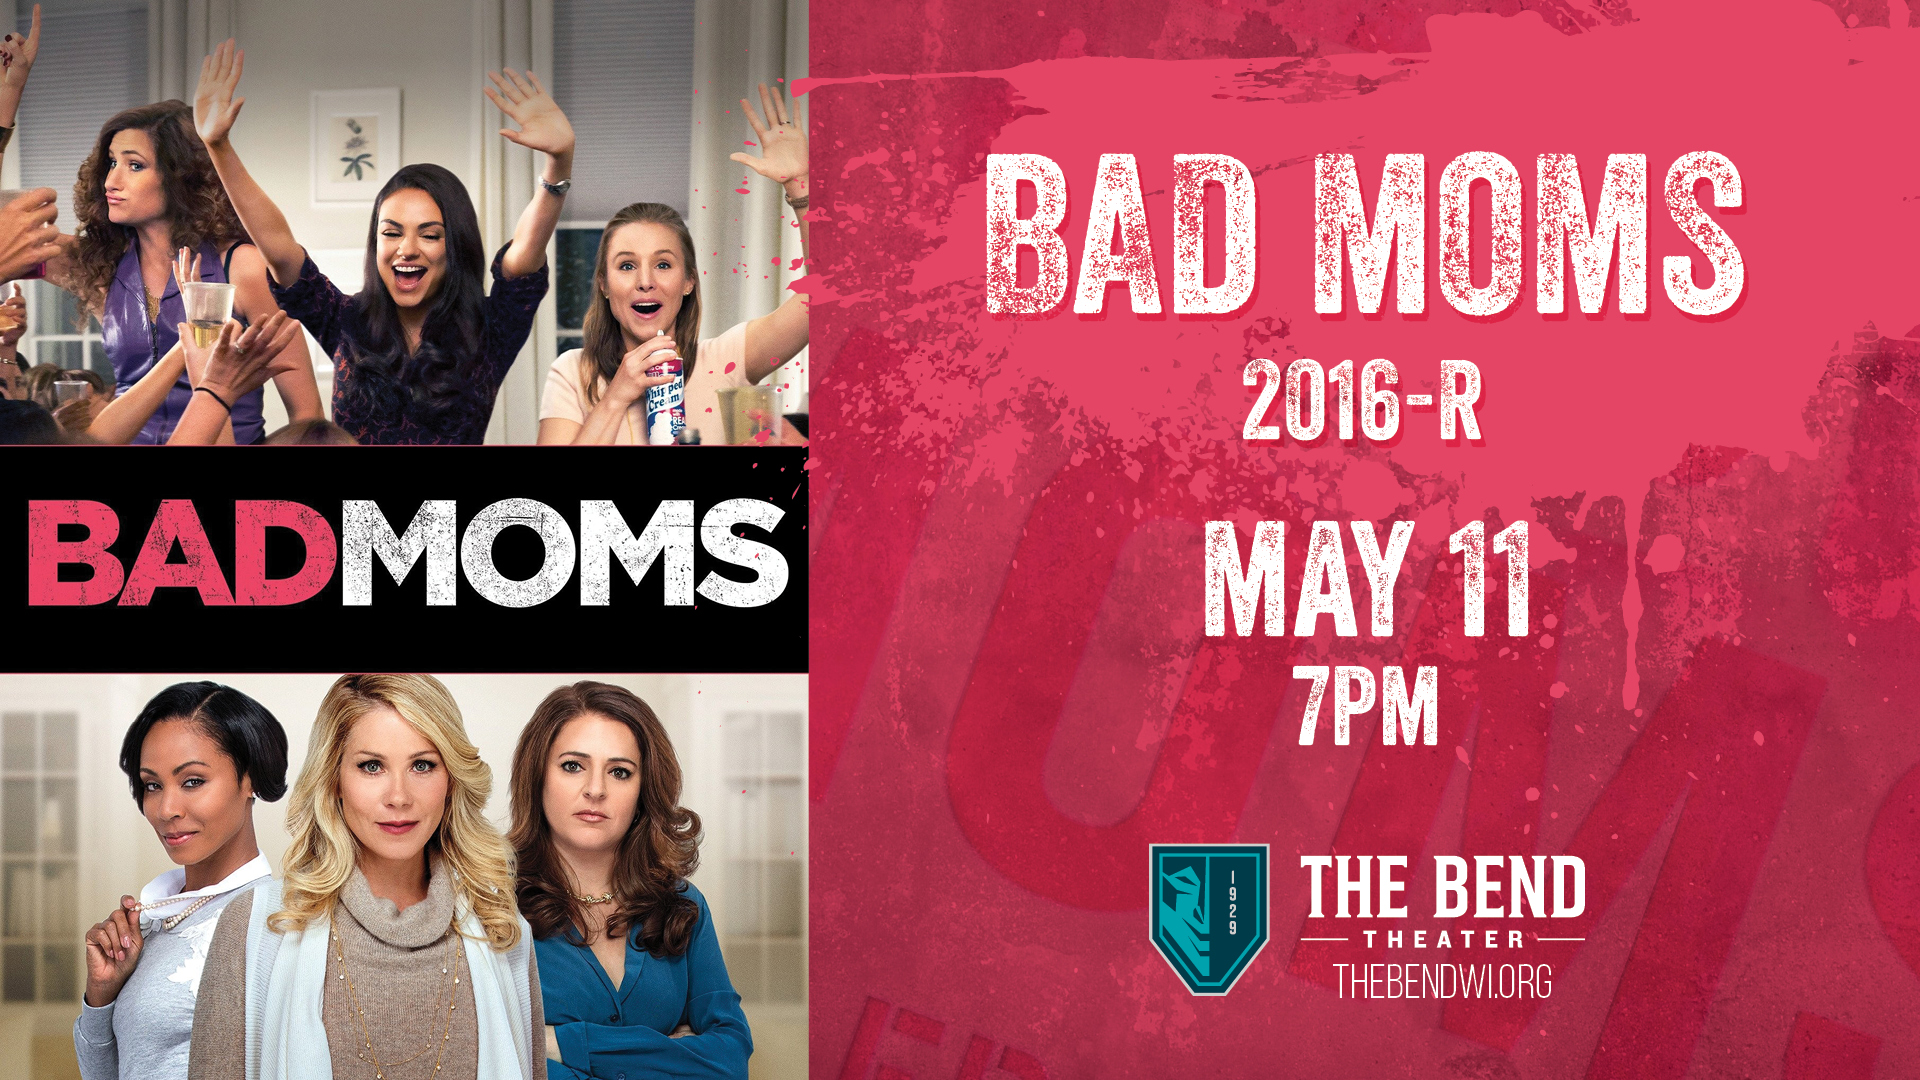 Bad Moms on the Big Screen at The Bend Theater